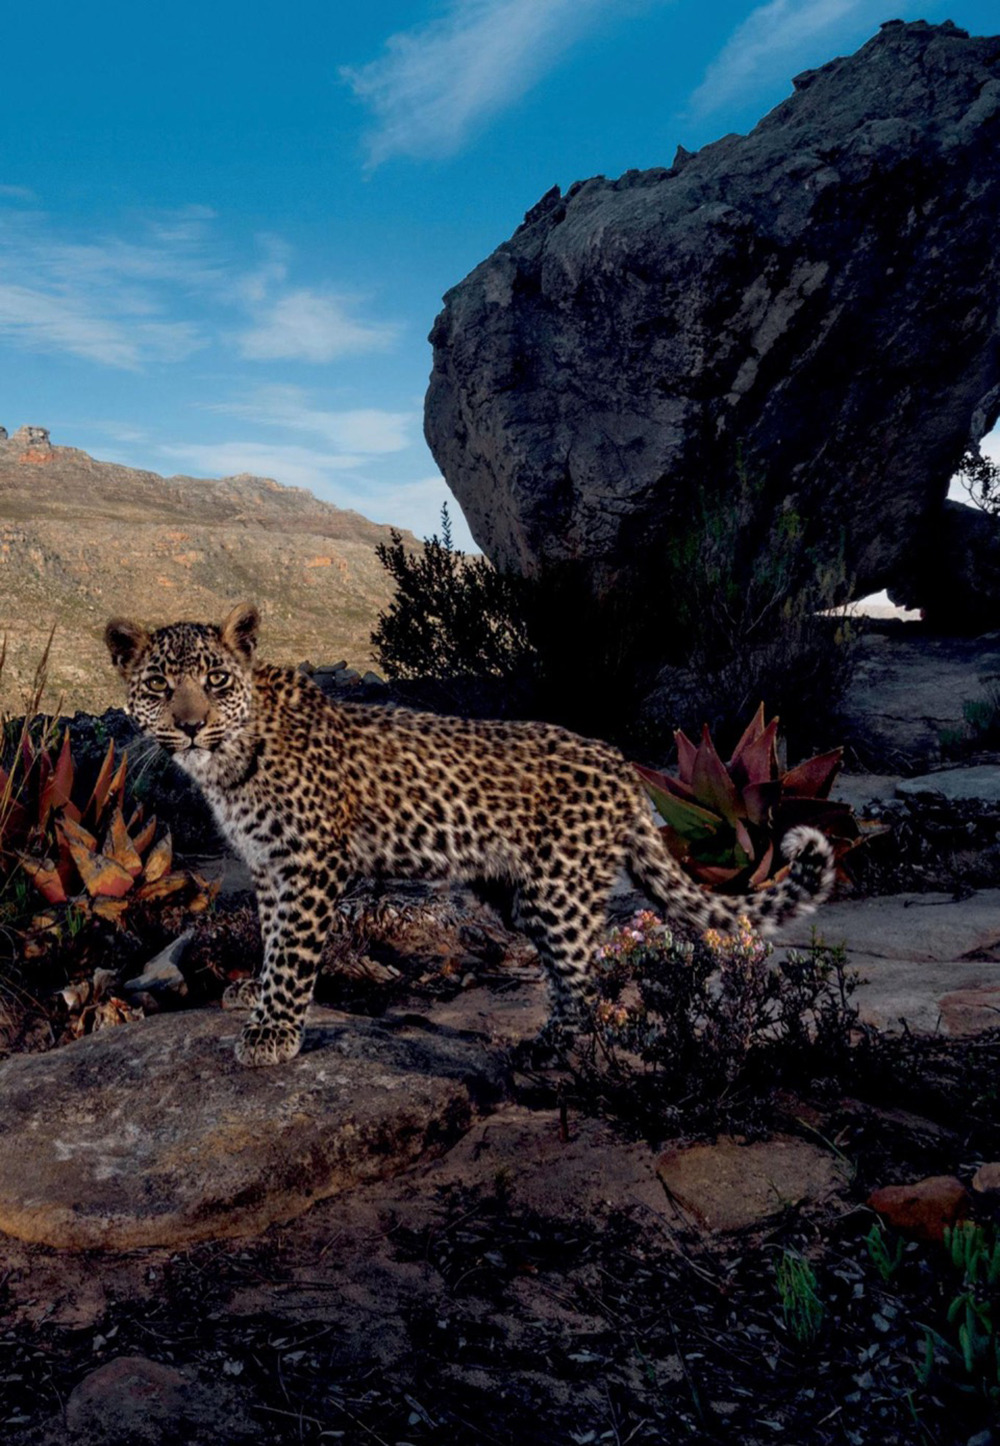 OUT OF THE SHADOWS: As cities grow and habitat shrinks, leopards are moving into the neighborhood - photograph by Steve Winter - National Geographic December 2015 (full story & gallery)• “A camera trap set in South Africa’s Cederberg Wilderness...